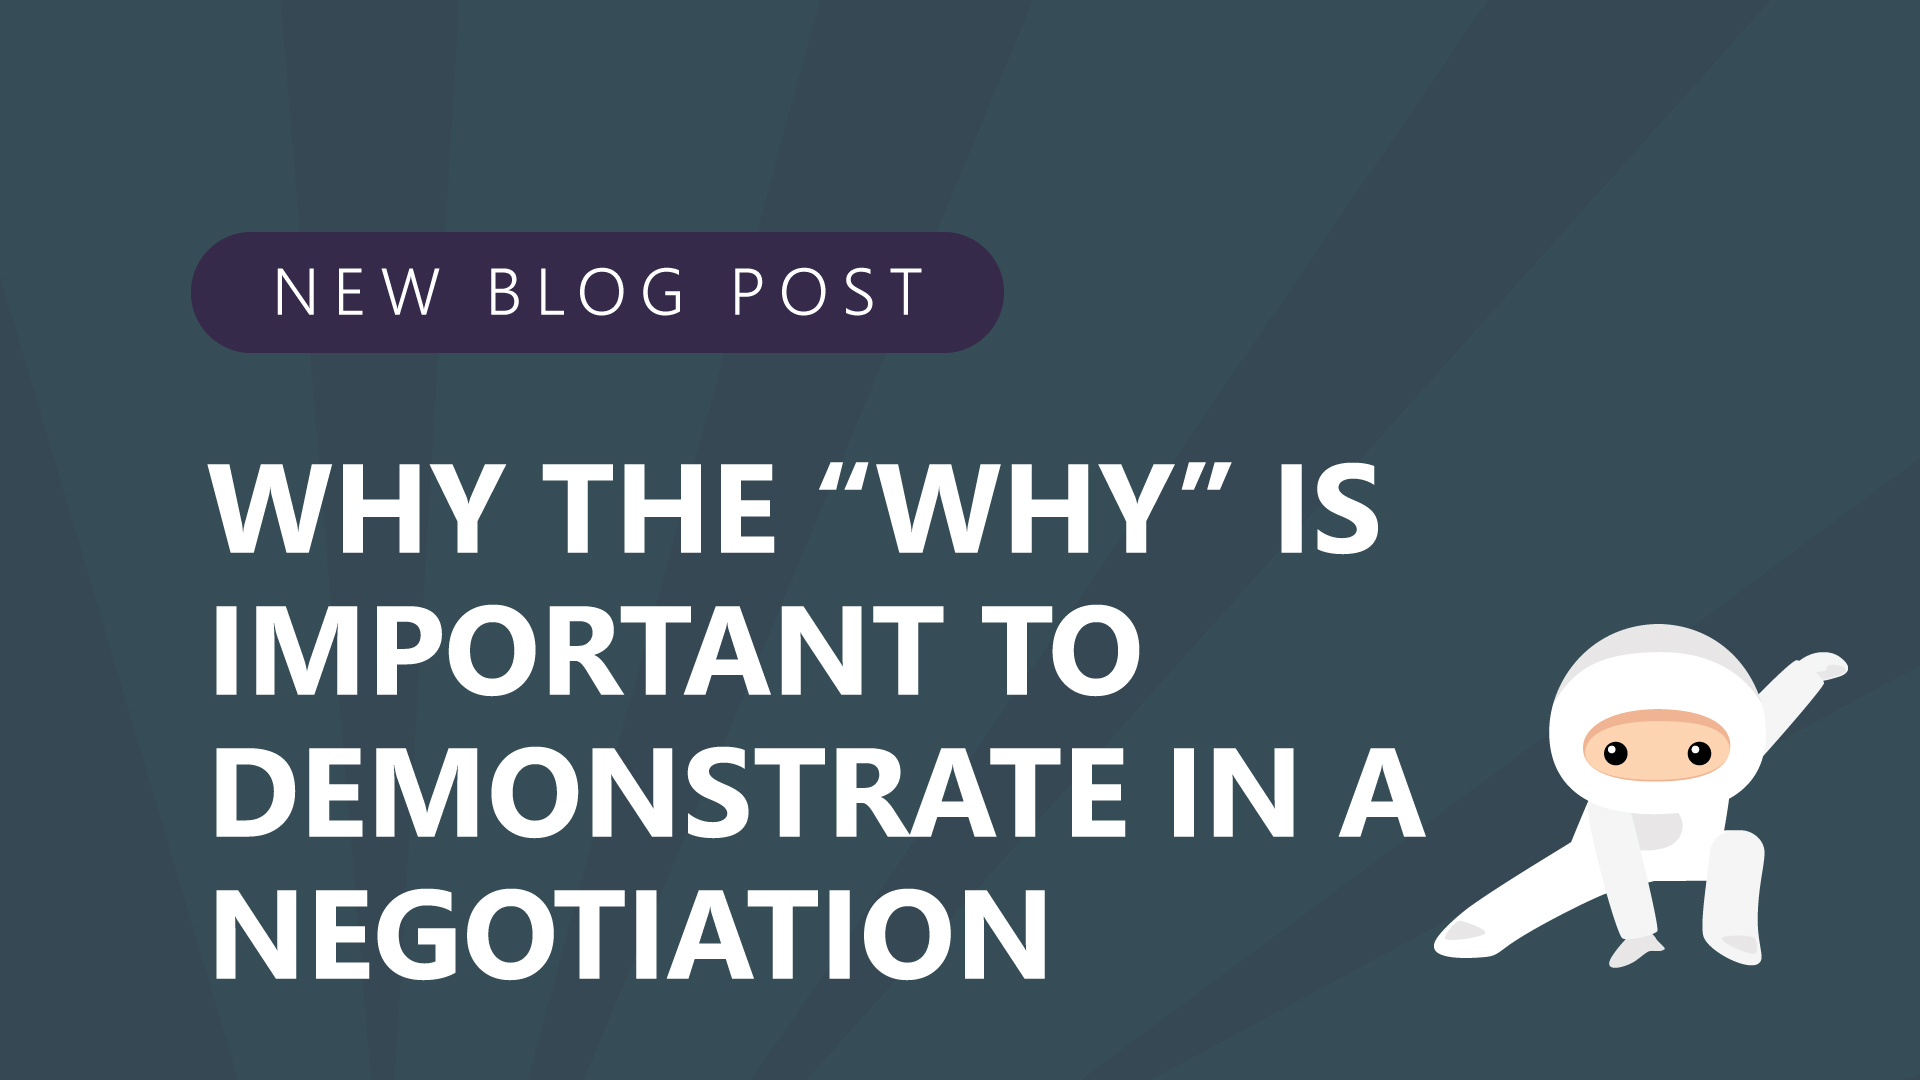 8-Why-the-Why-is-Important-to-Demonstrate-in-a-Negotiation.jpg